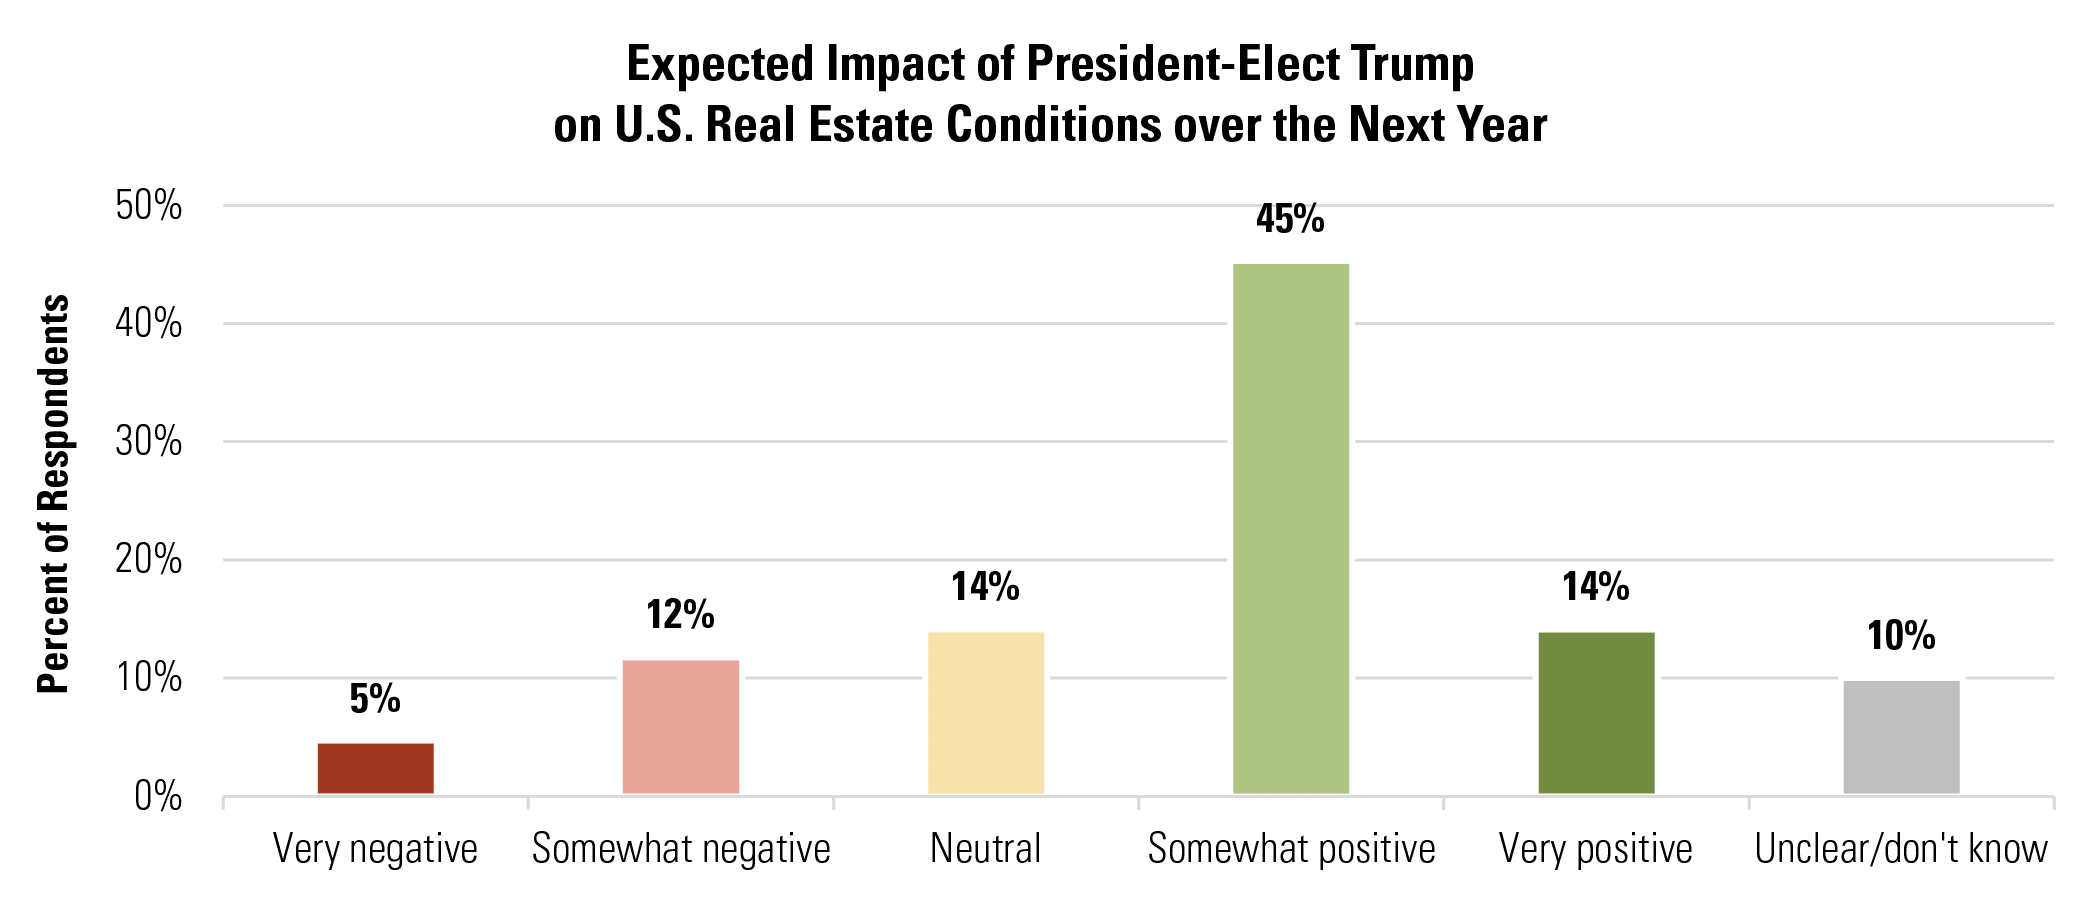 Expected Impact of President-Elect Trump on U.S. Real Estate Conditions over the Next Year